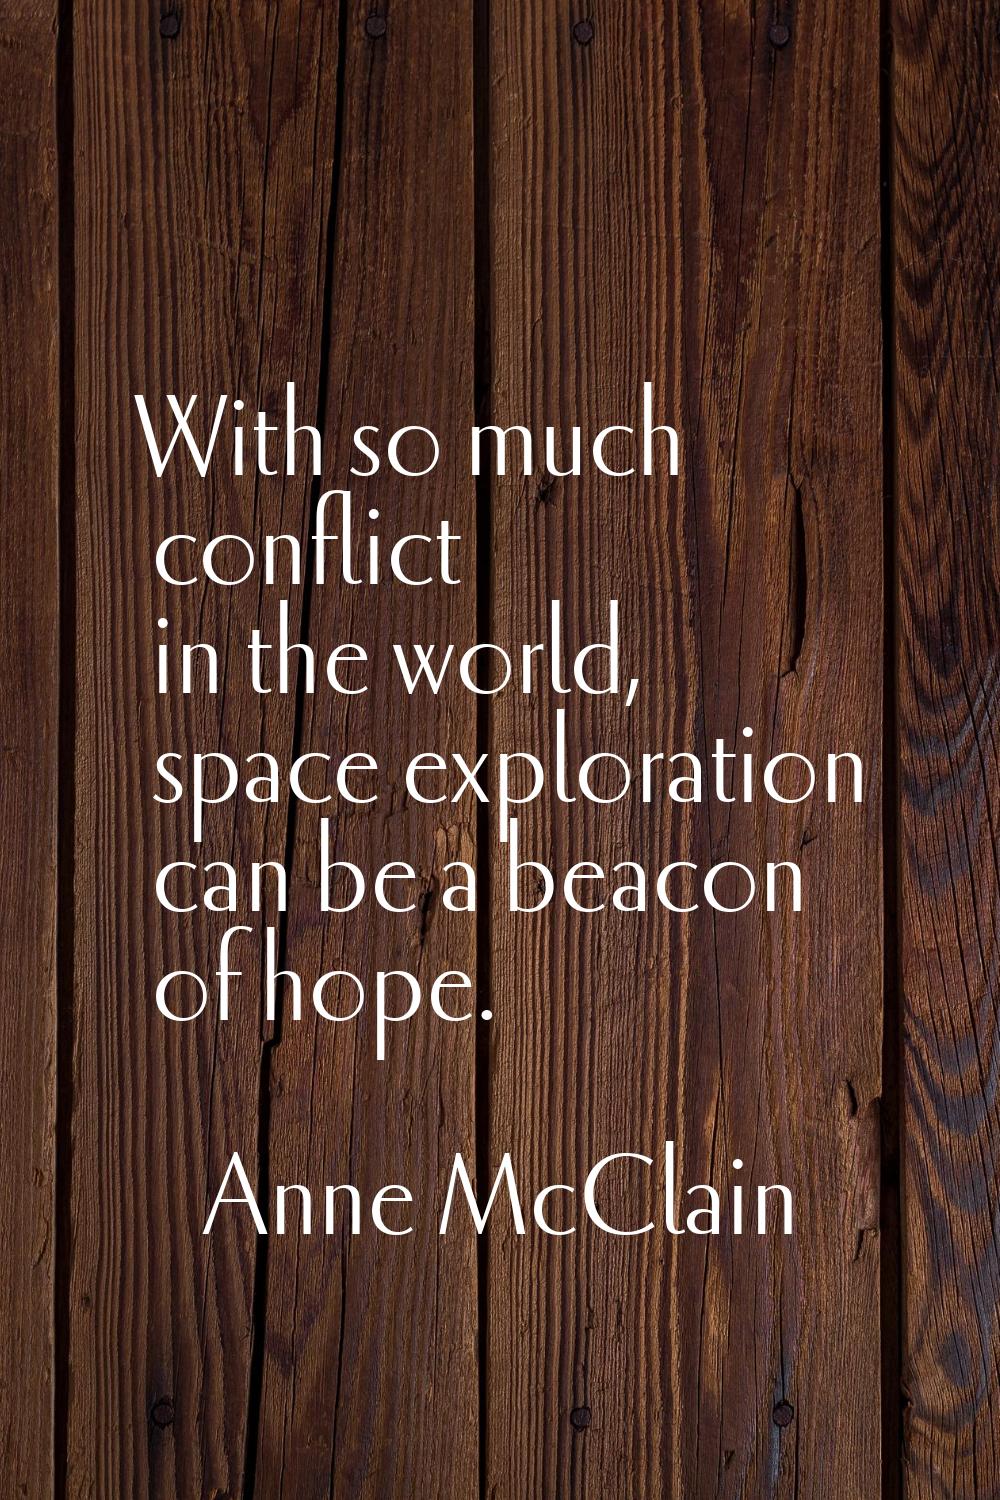 With so much conflict in the world, space exploration can be a beacon of hope.